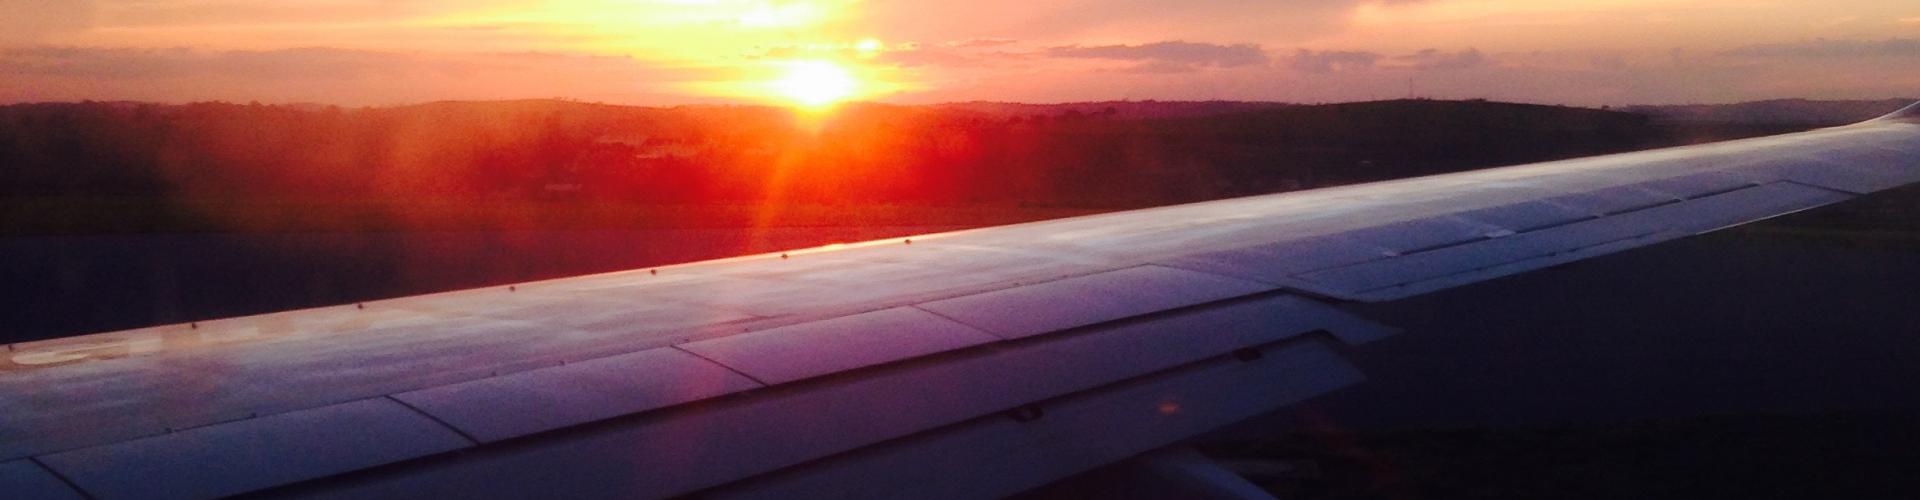 An airplane wing with a sunset in the background